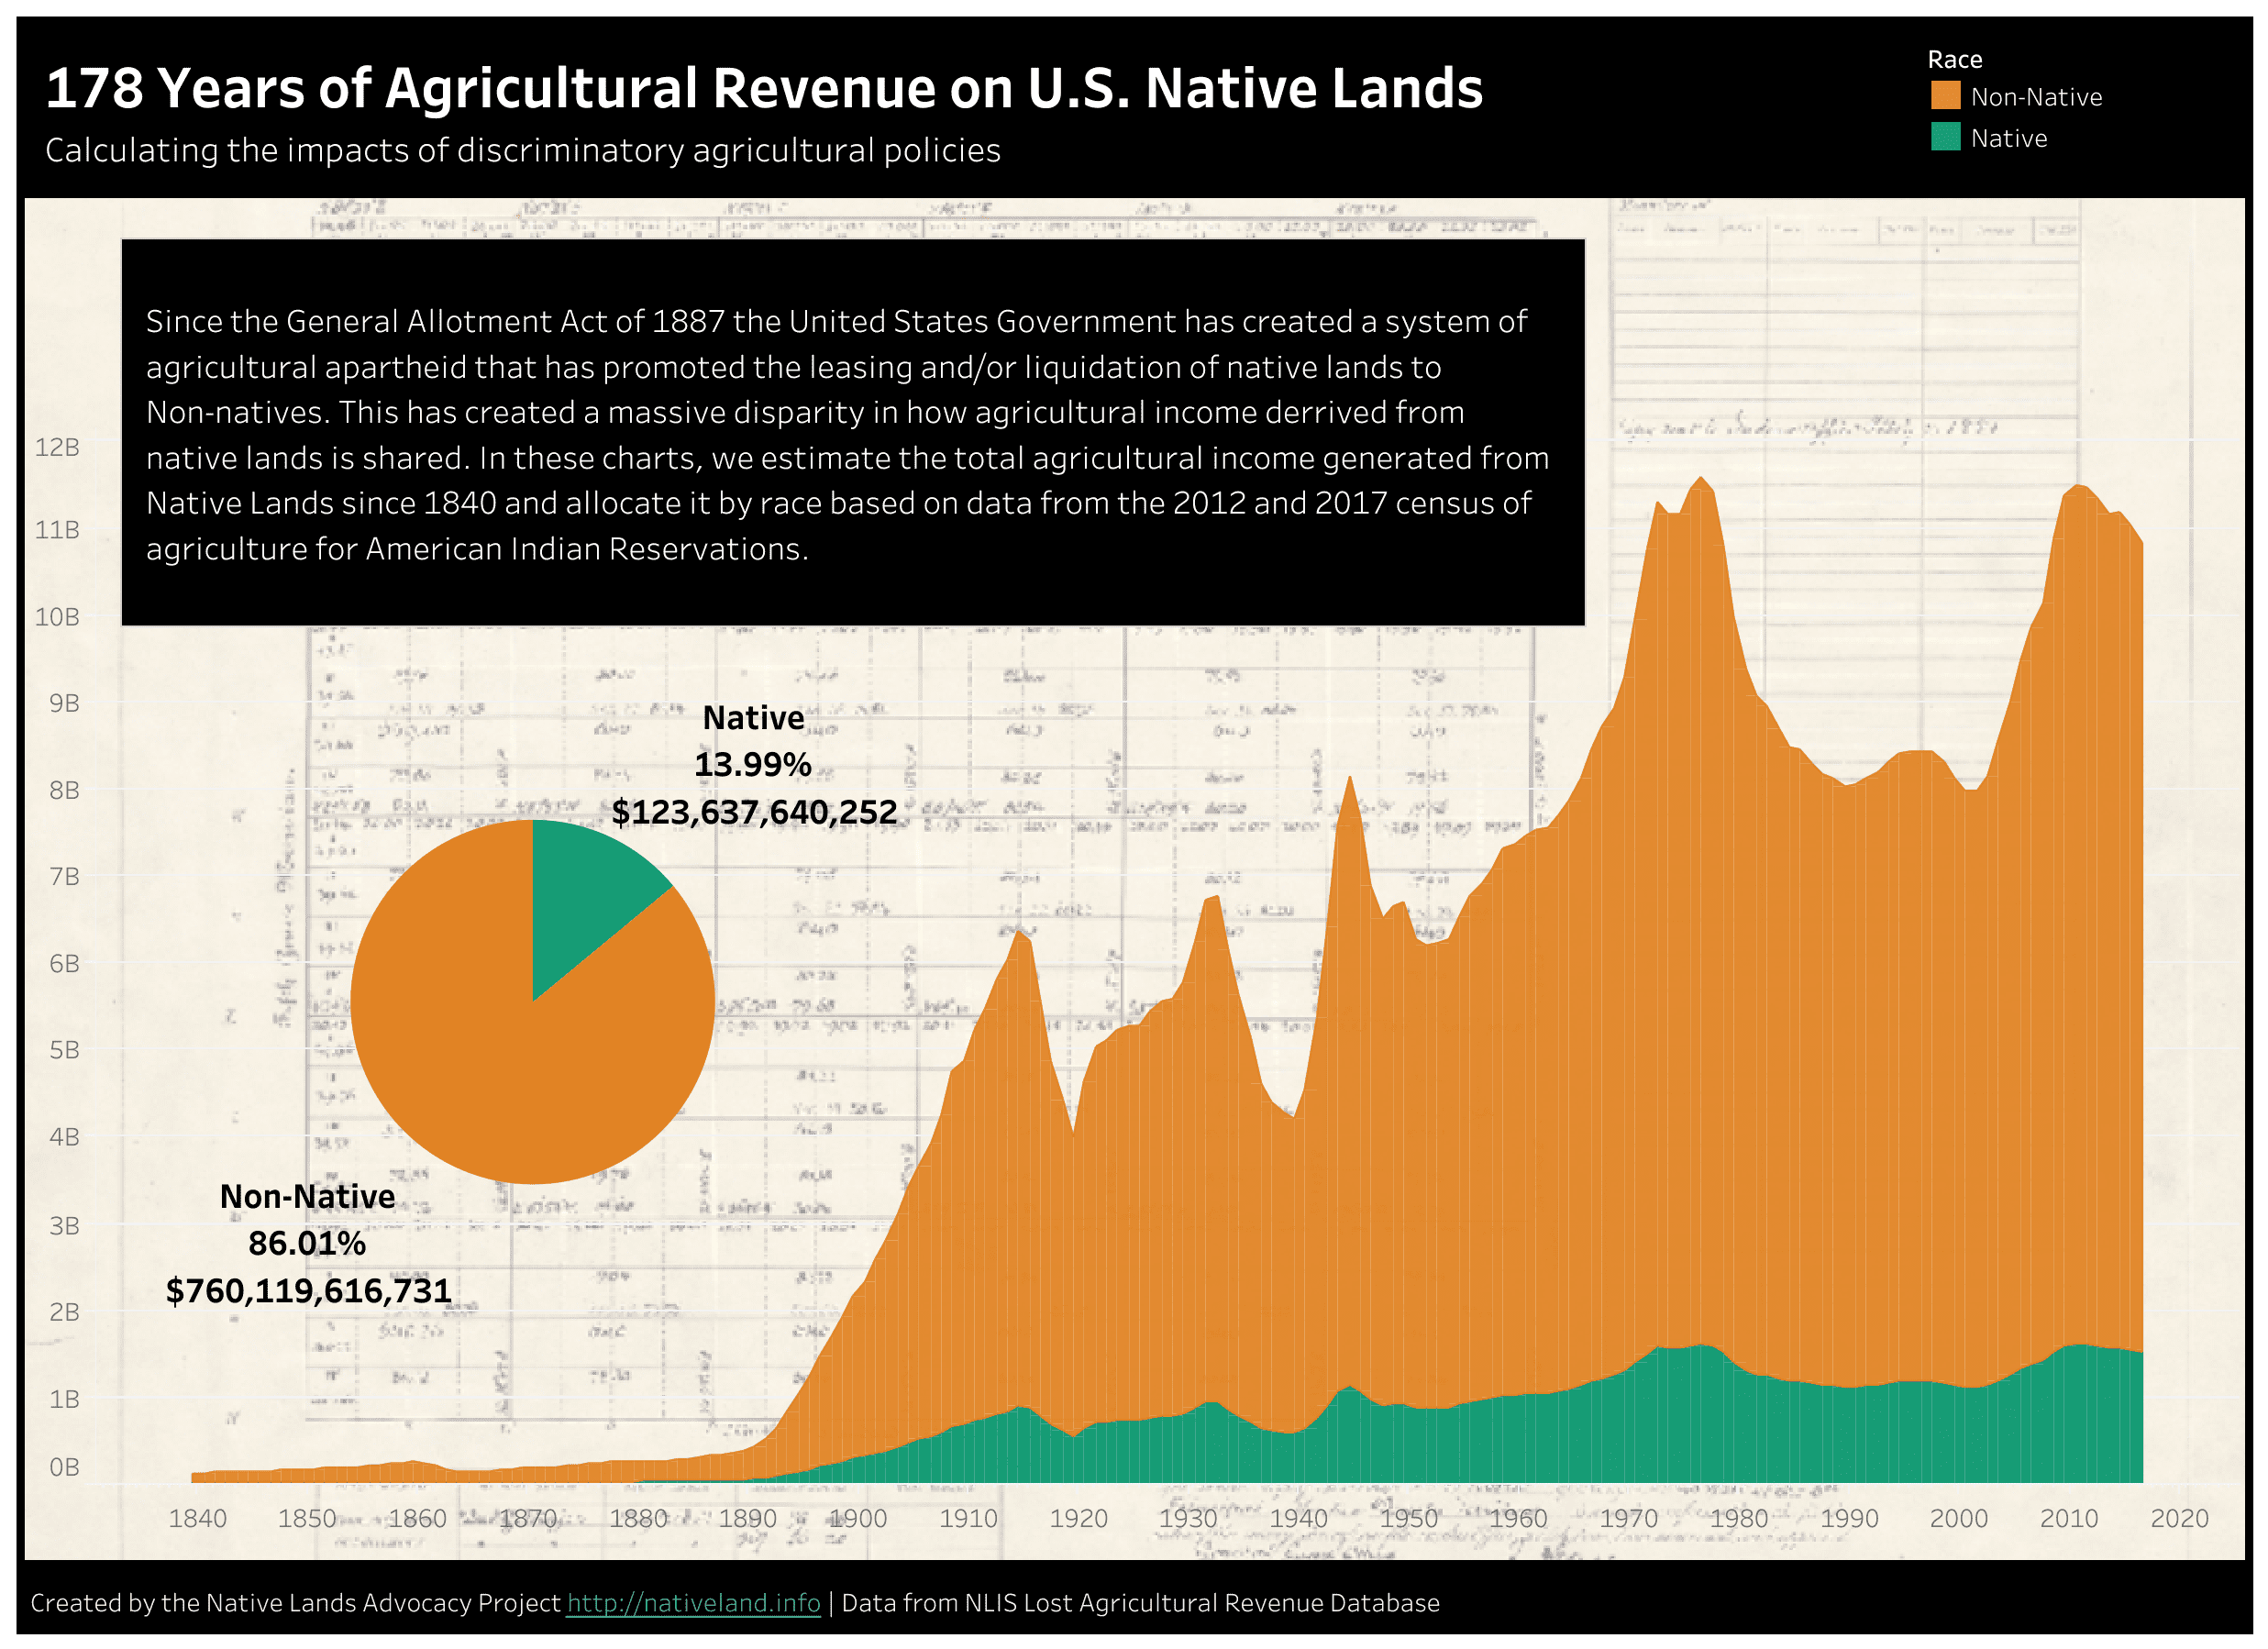 Lost Agriculture Revenue from Contemporary United States Native Lands